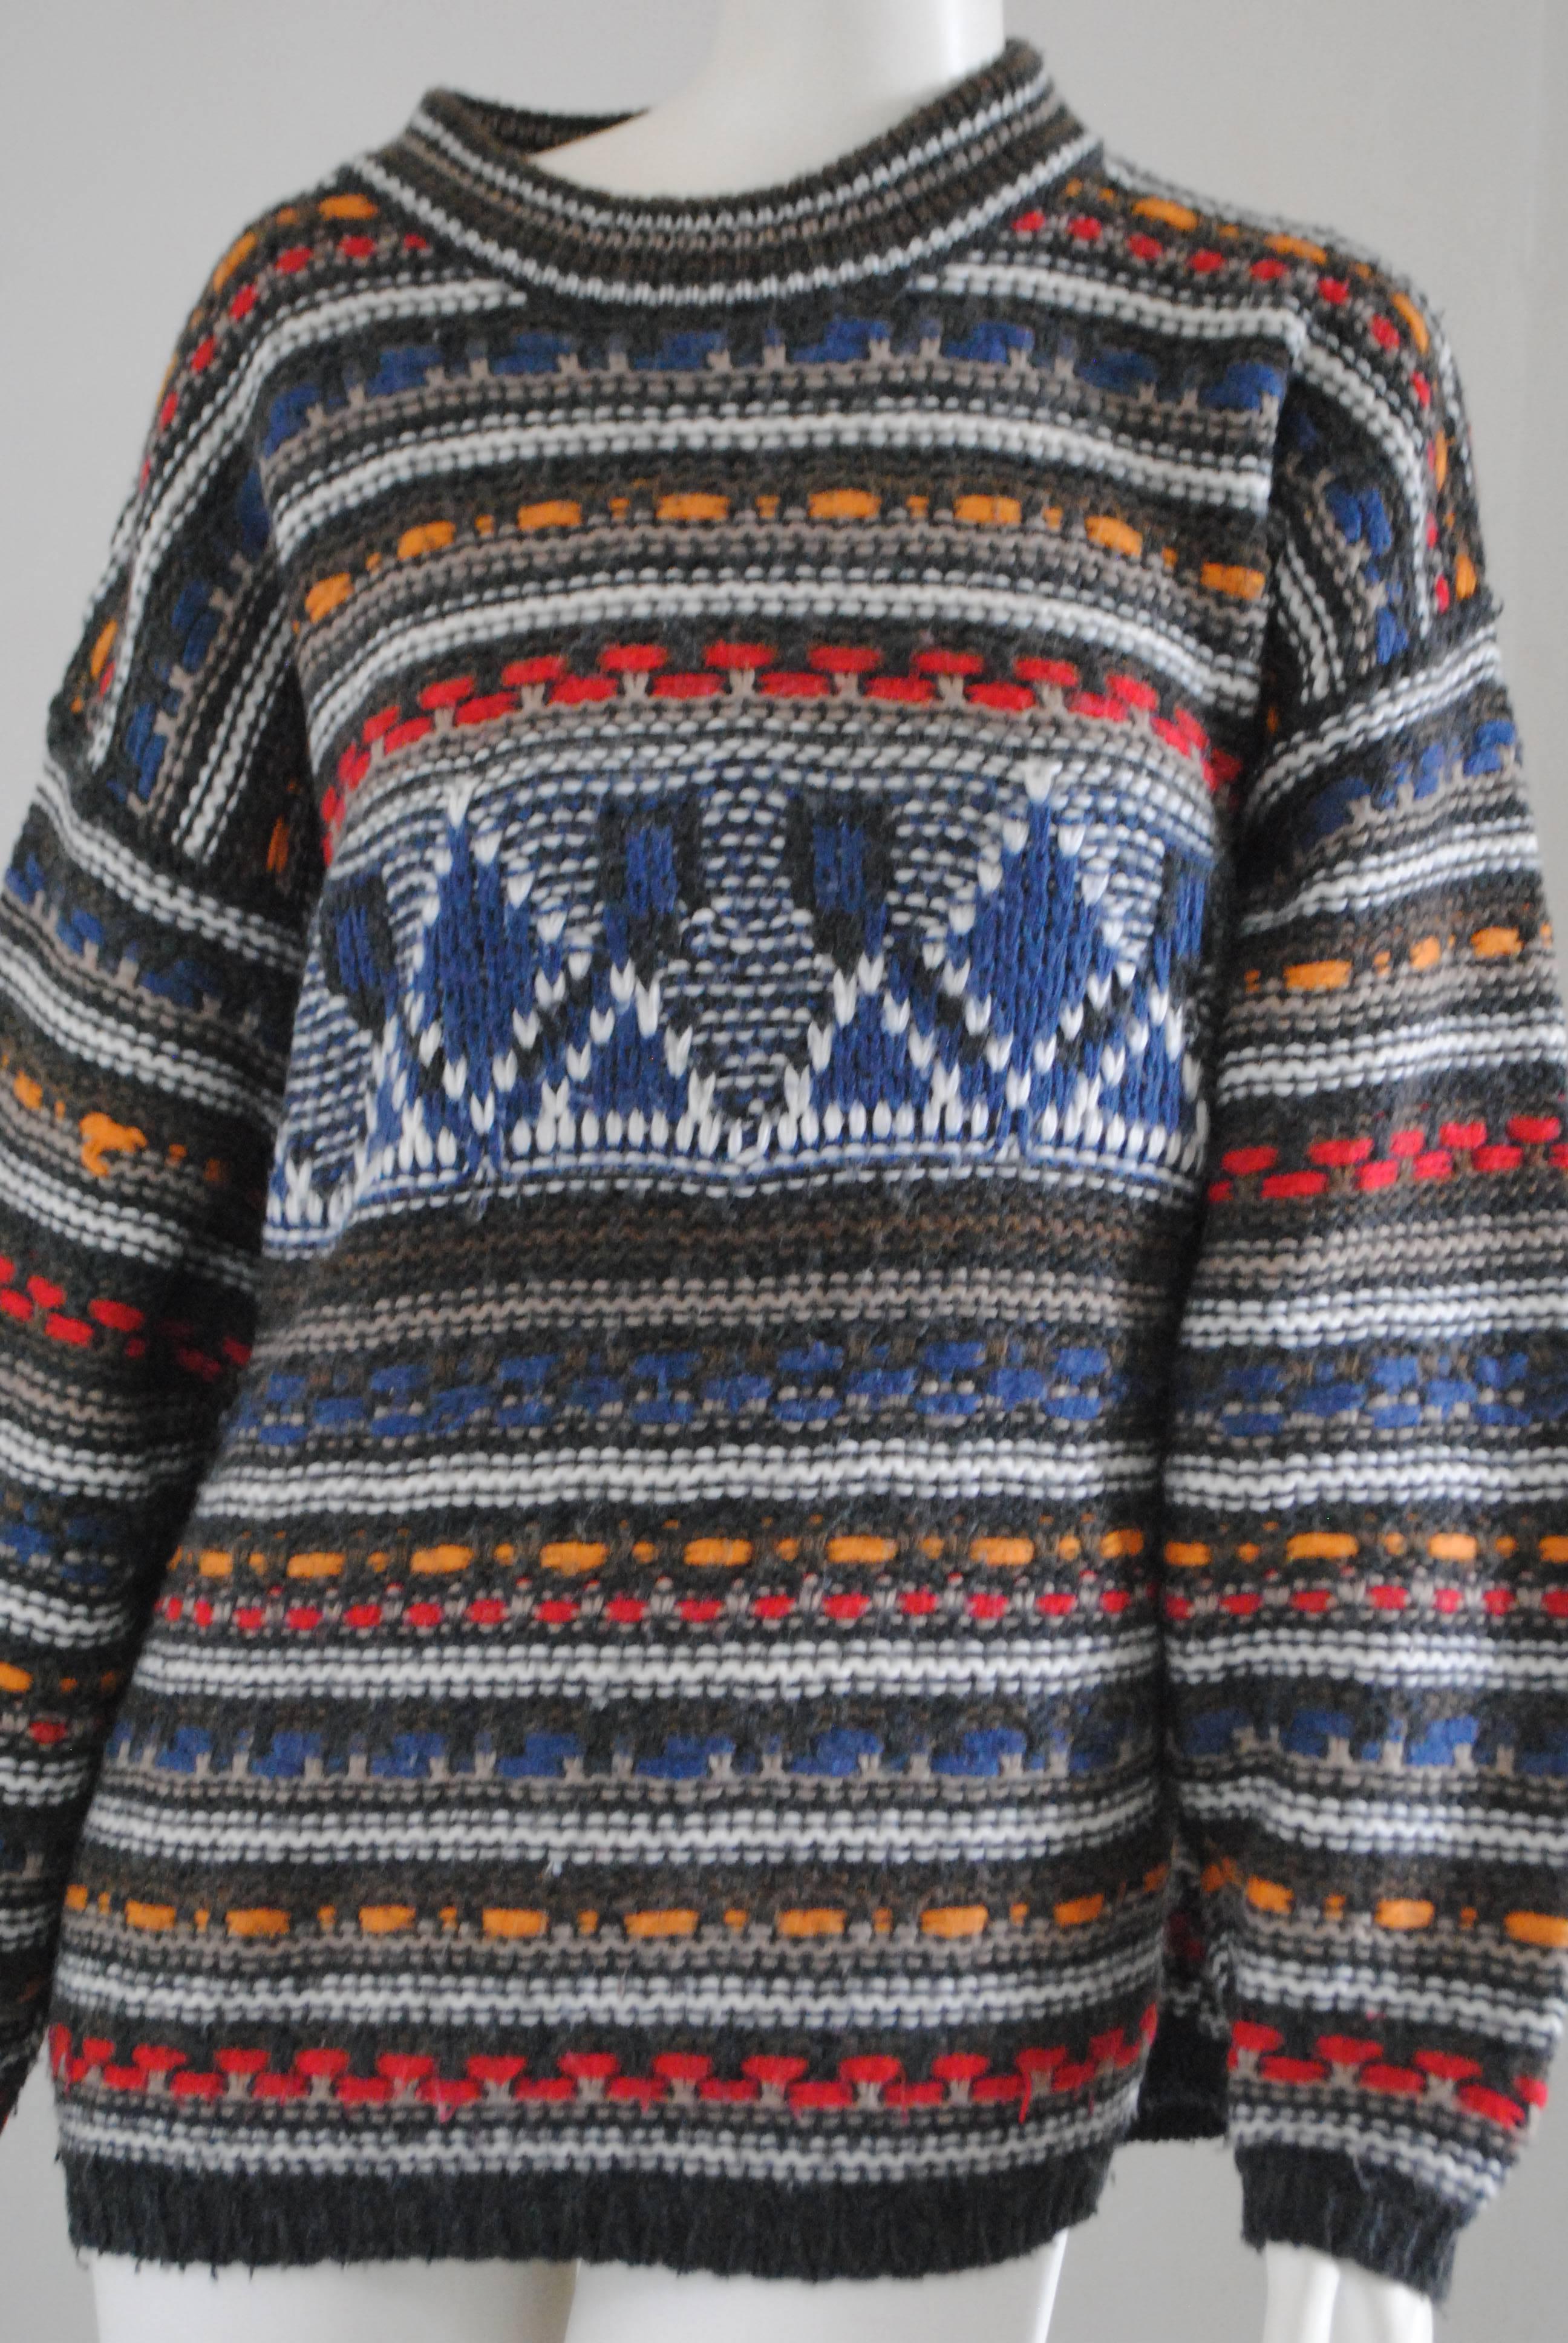 Missoni Sport Multicolour Wool Sweater

Totally made in italy in size L
